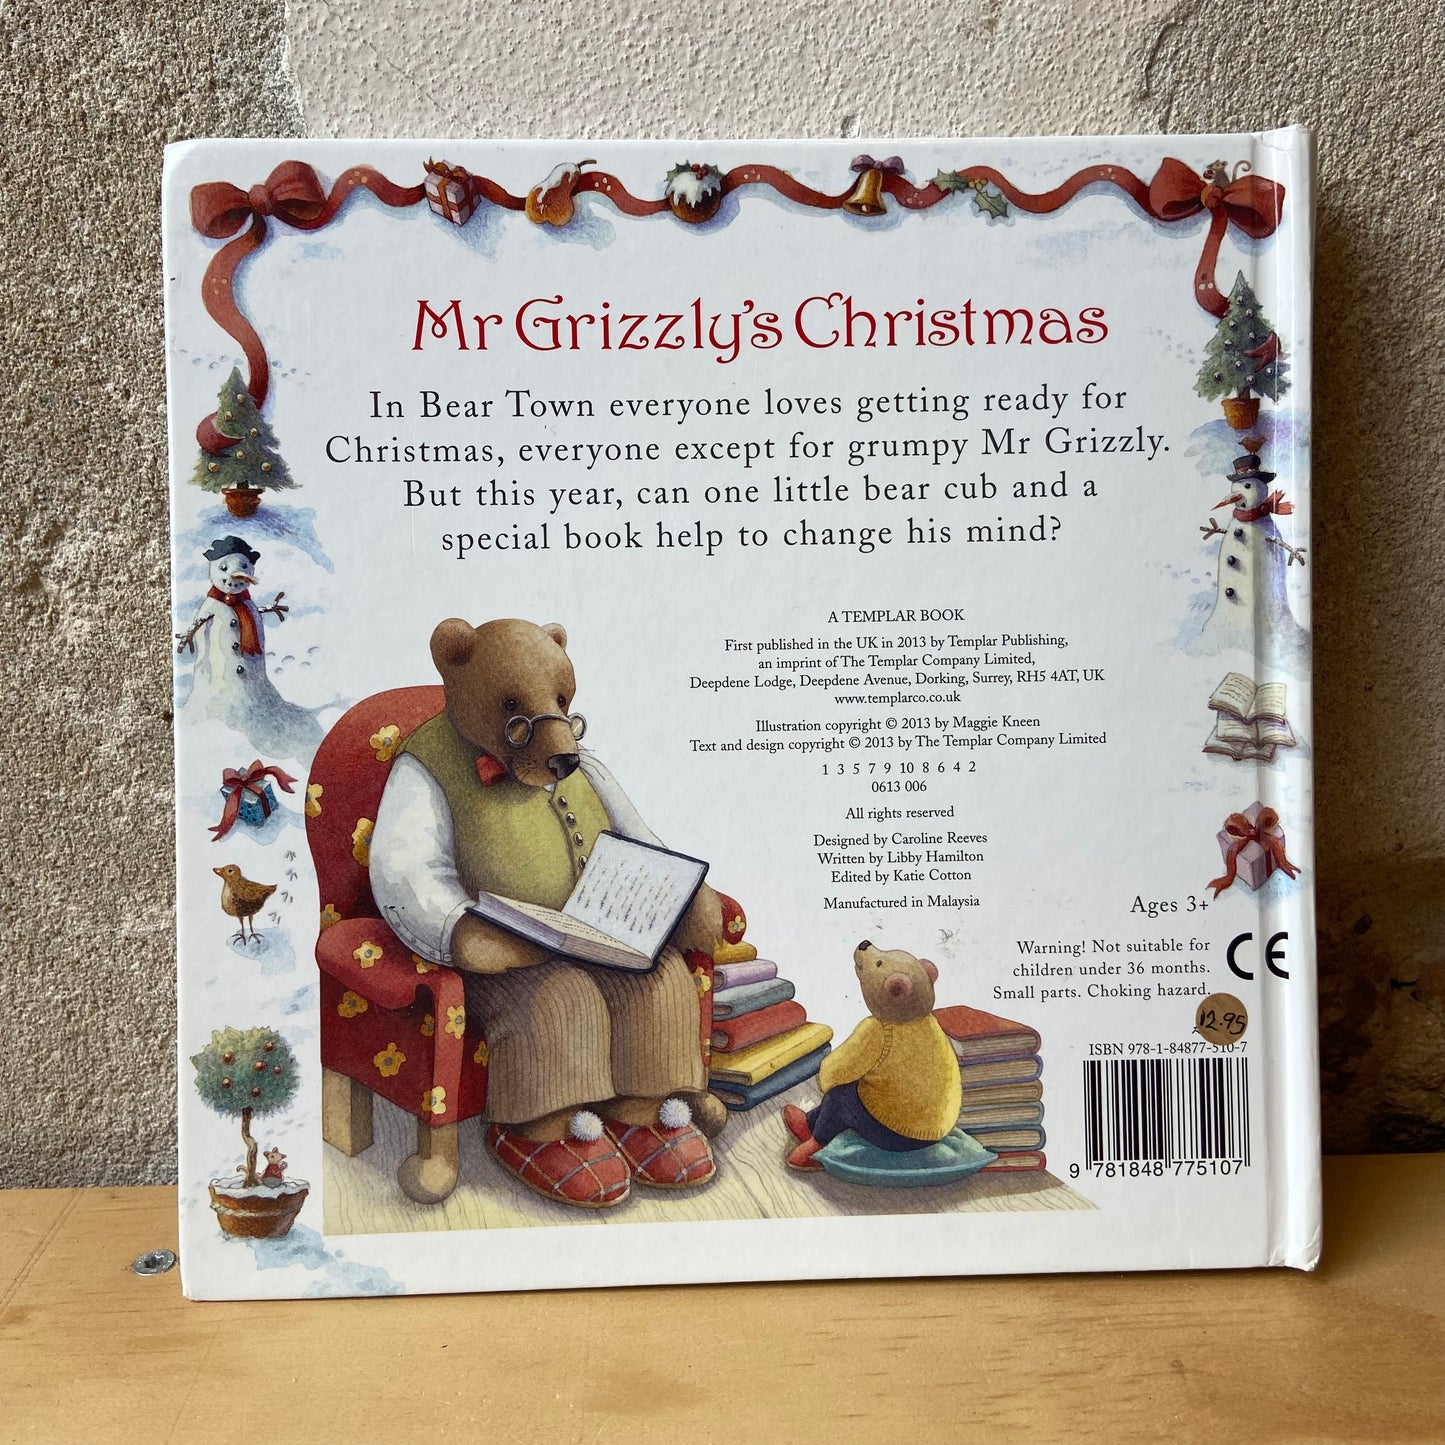 Mr. Grizzly's Christmas – Libby Hamilton and Maggie Kneen